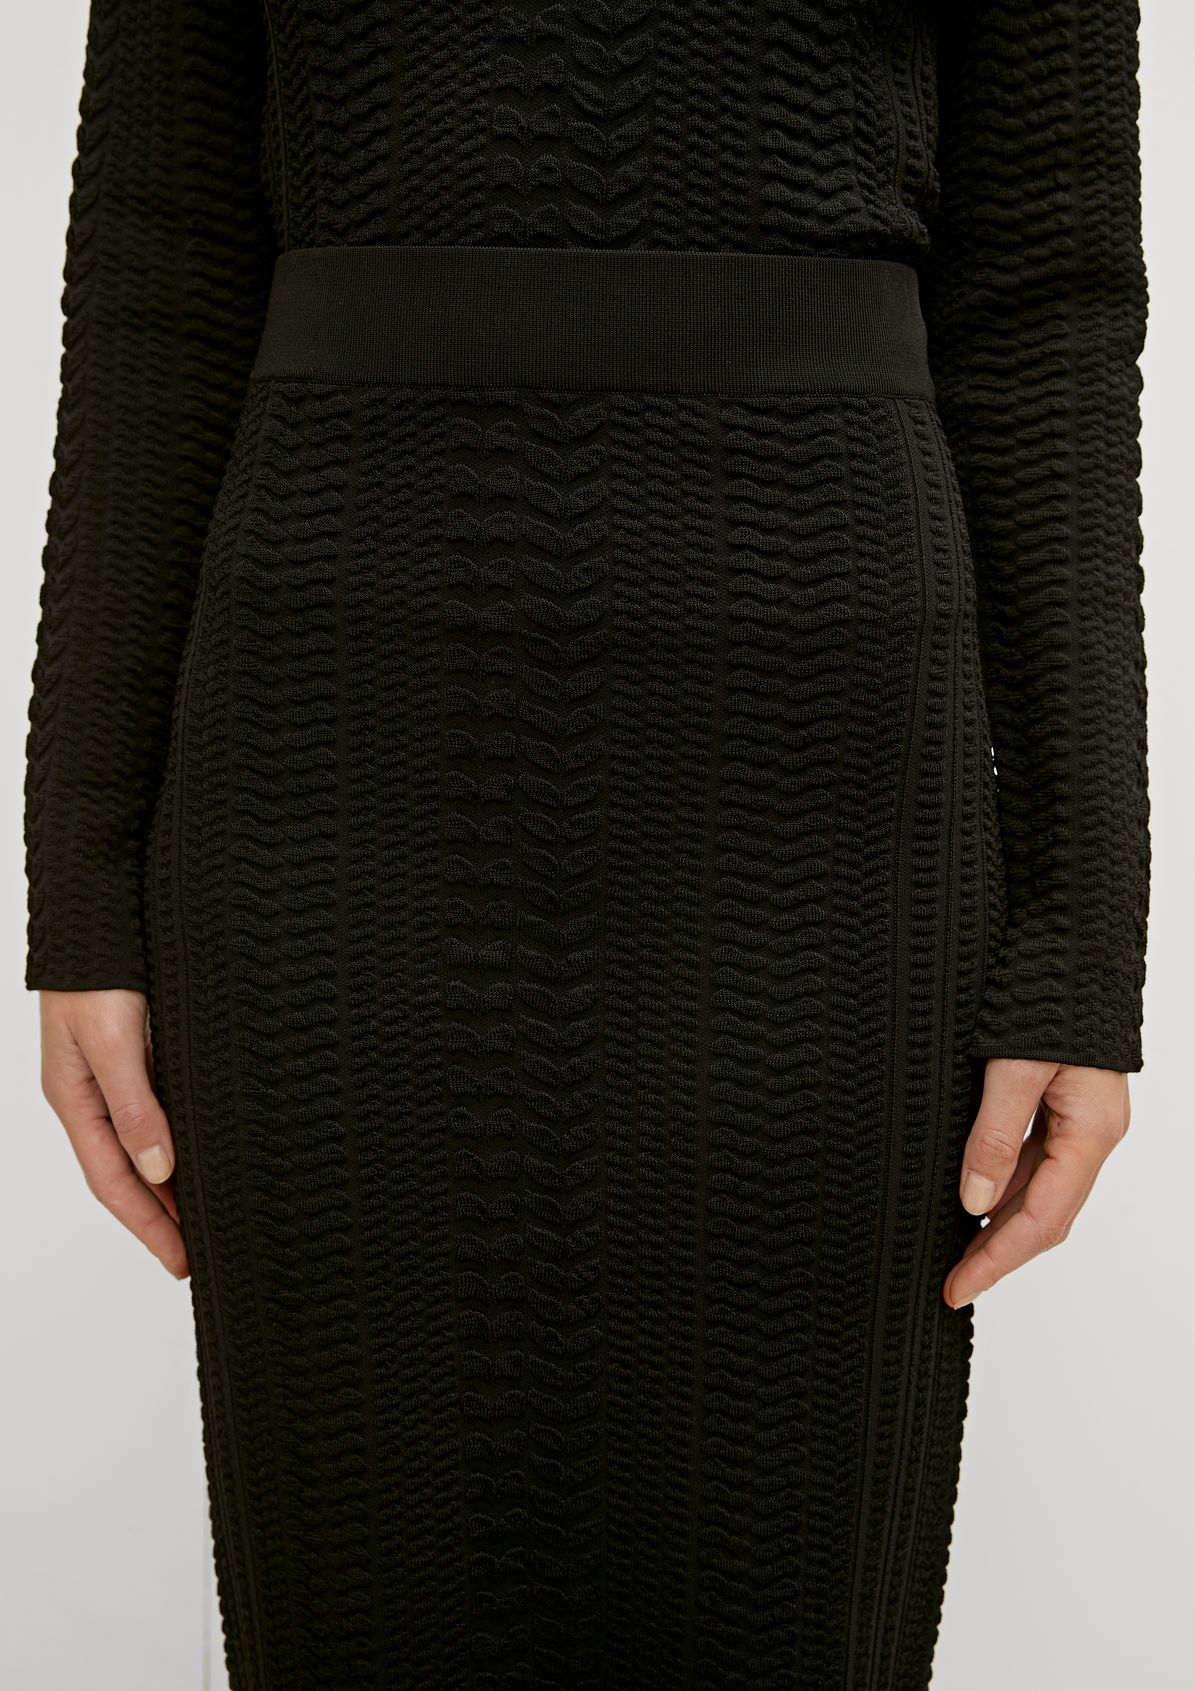 Textured pencil skirt from comma